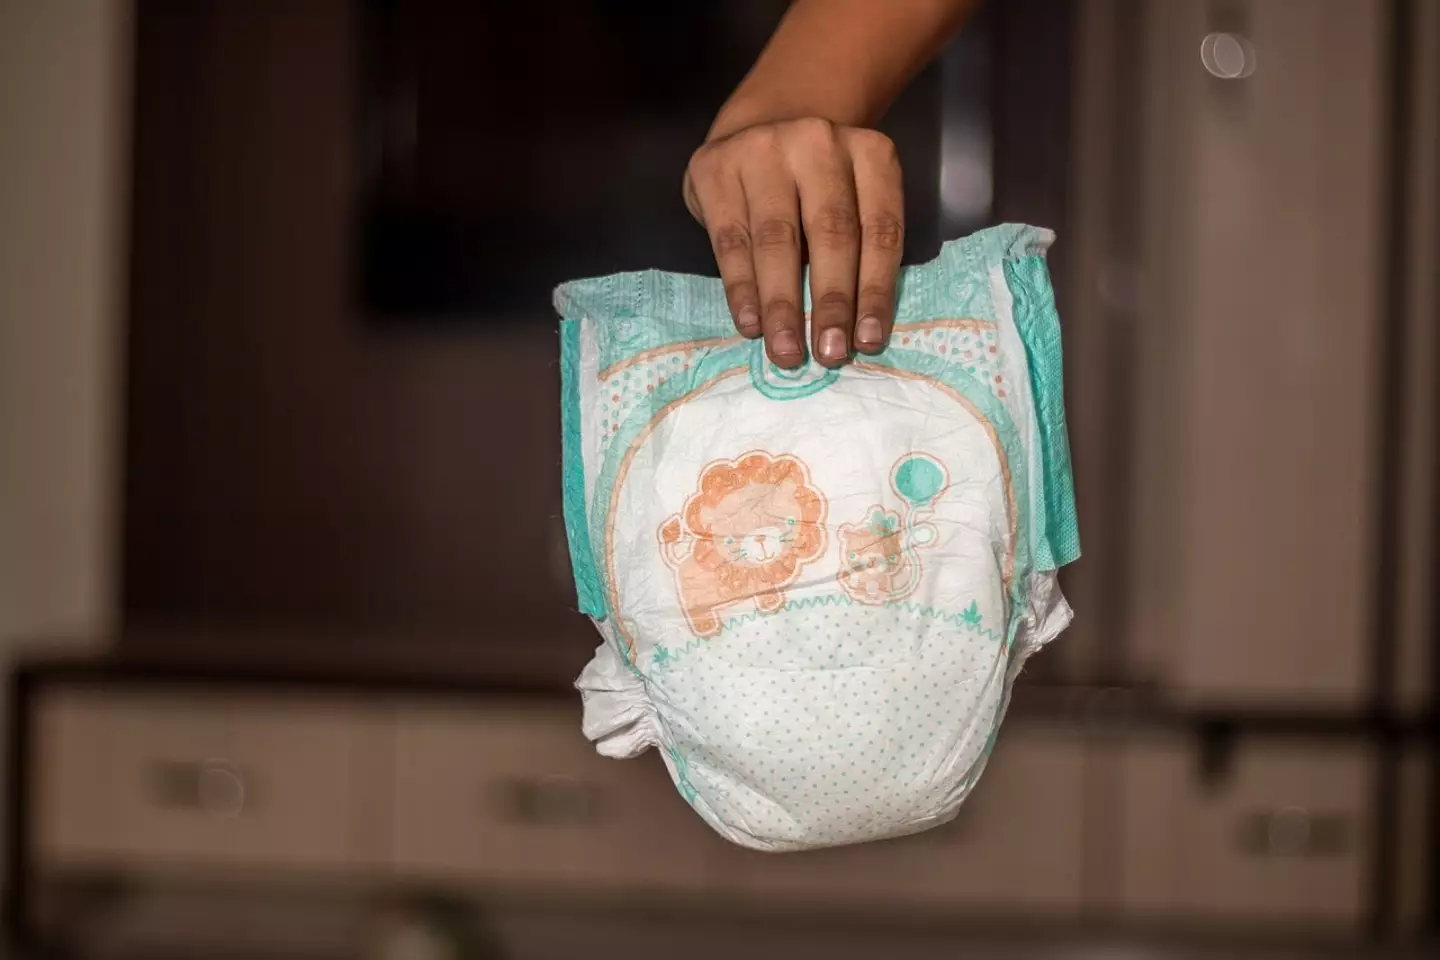 The toddler needed their nappy changing three or four times.